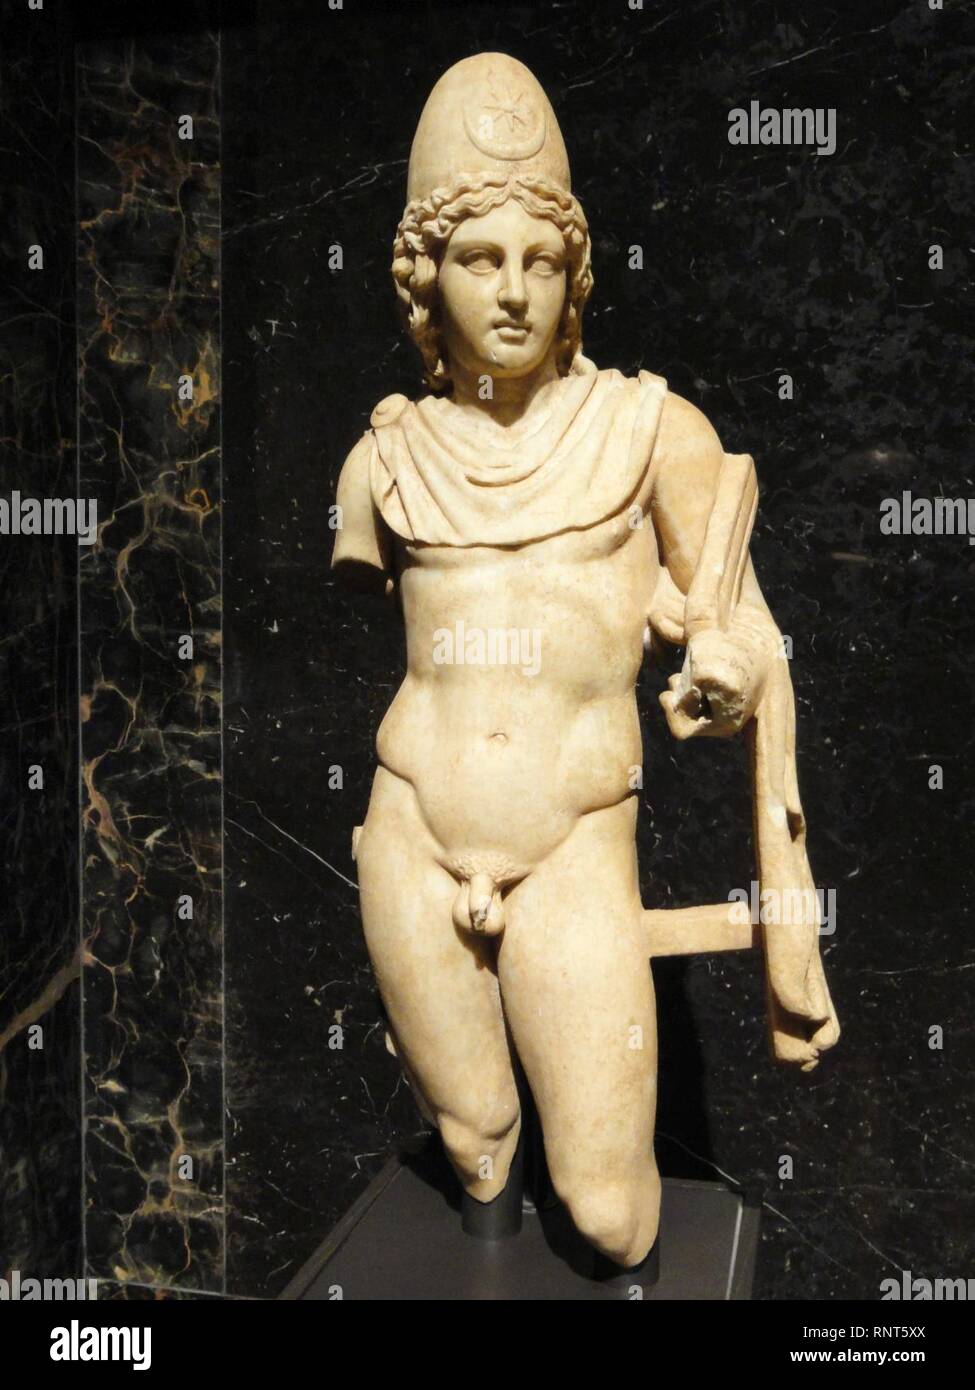 Castor or Pollux, probably Italy, 2nd century CE - Stock Photo